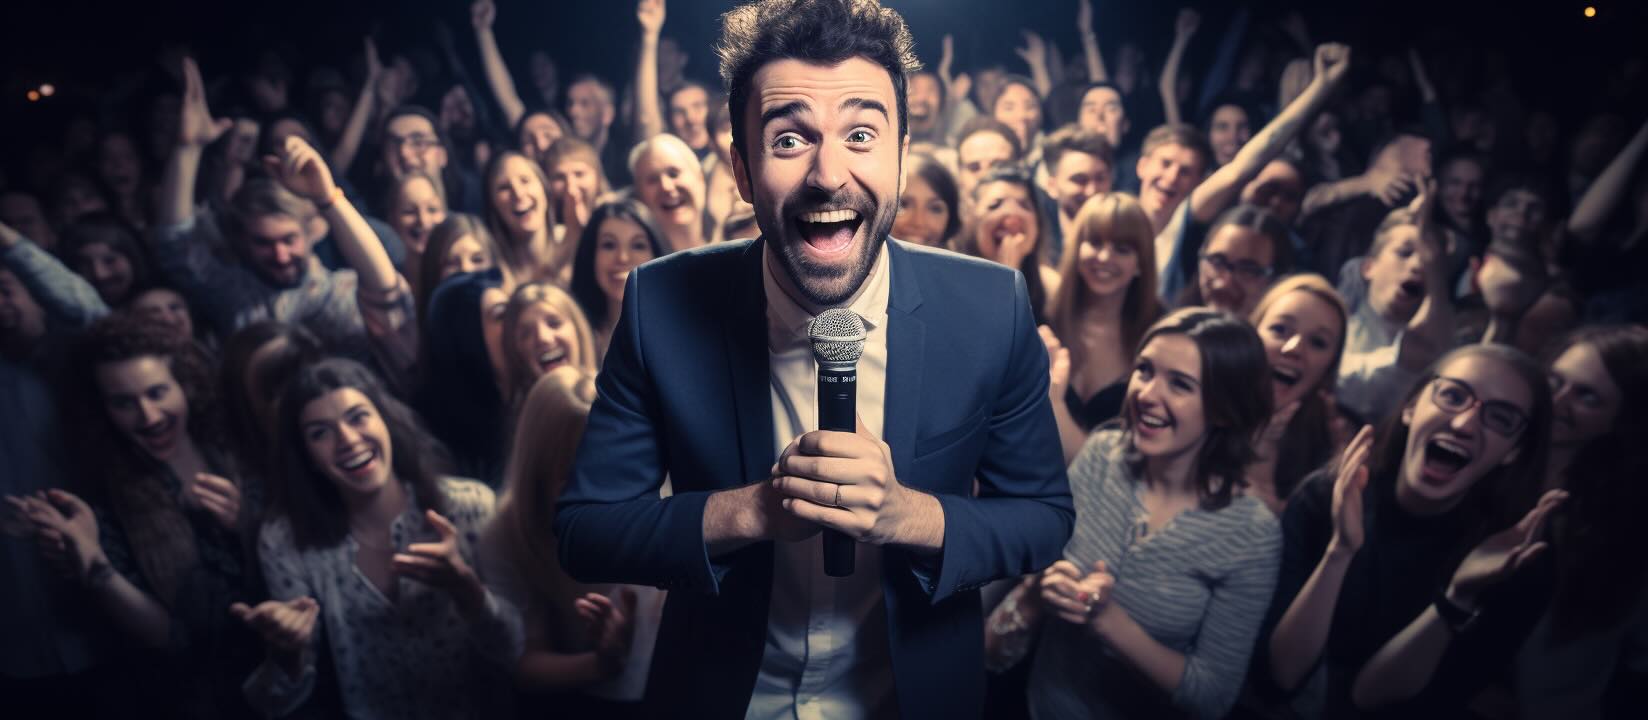 How Social Impact of Comedy Shows